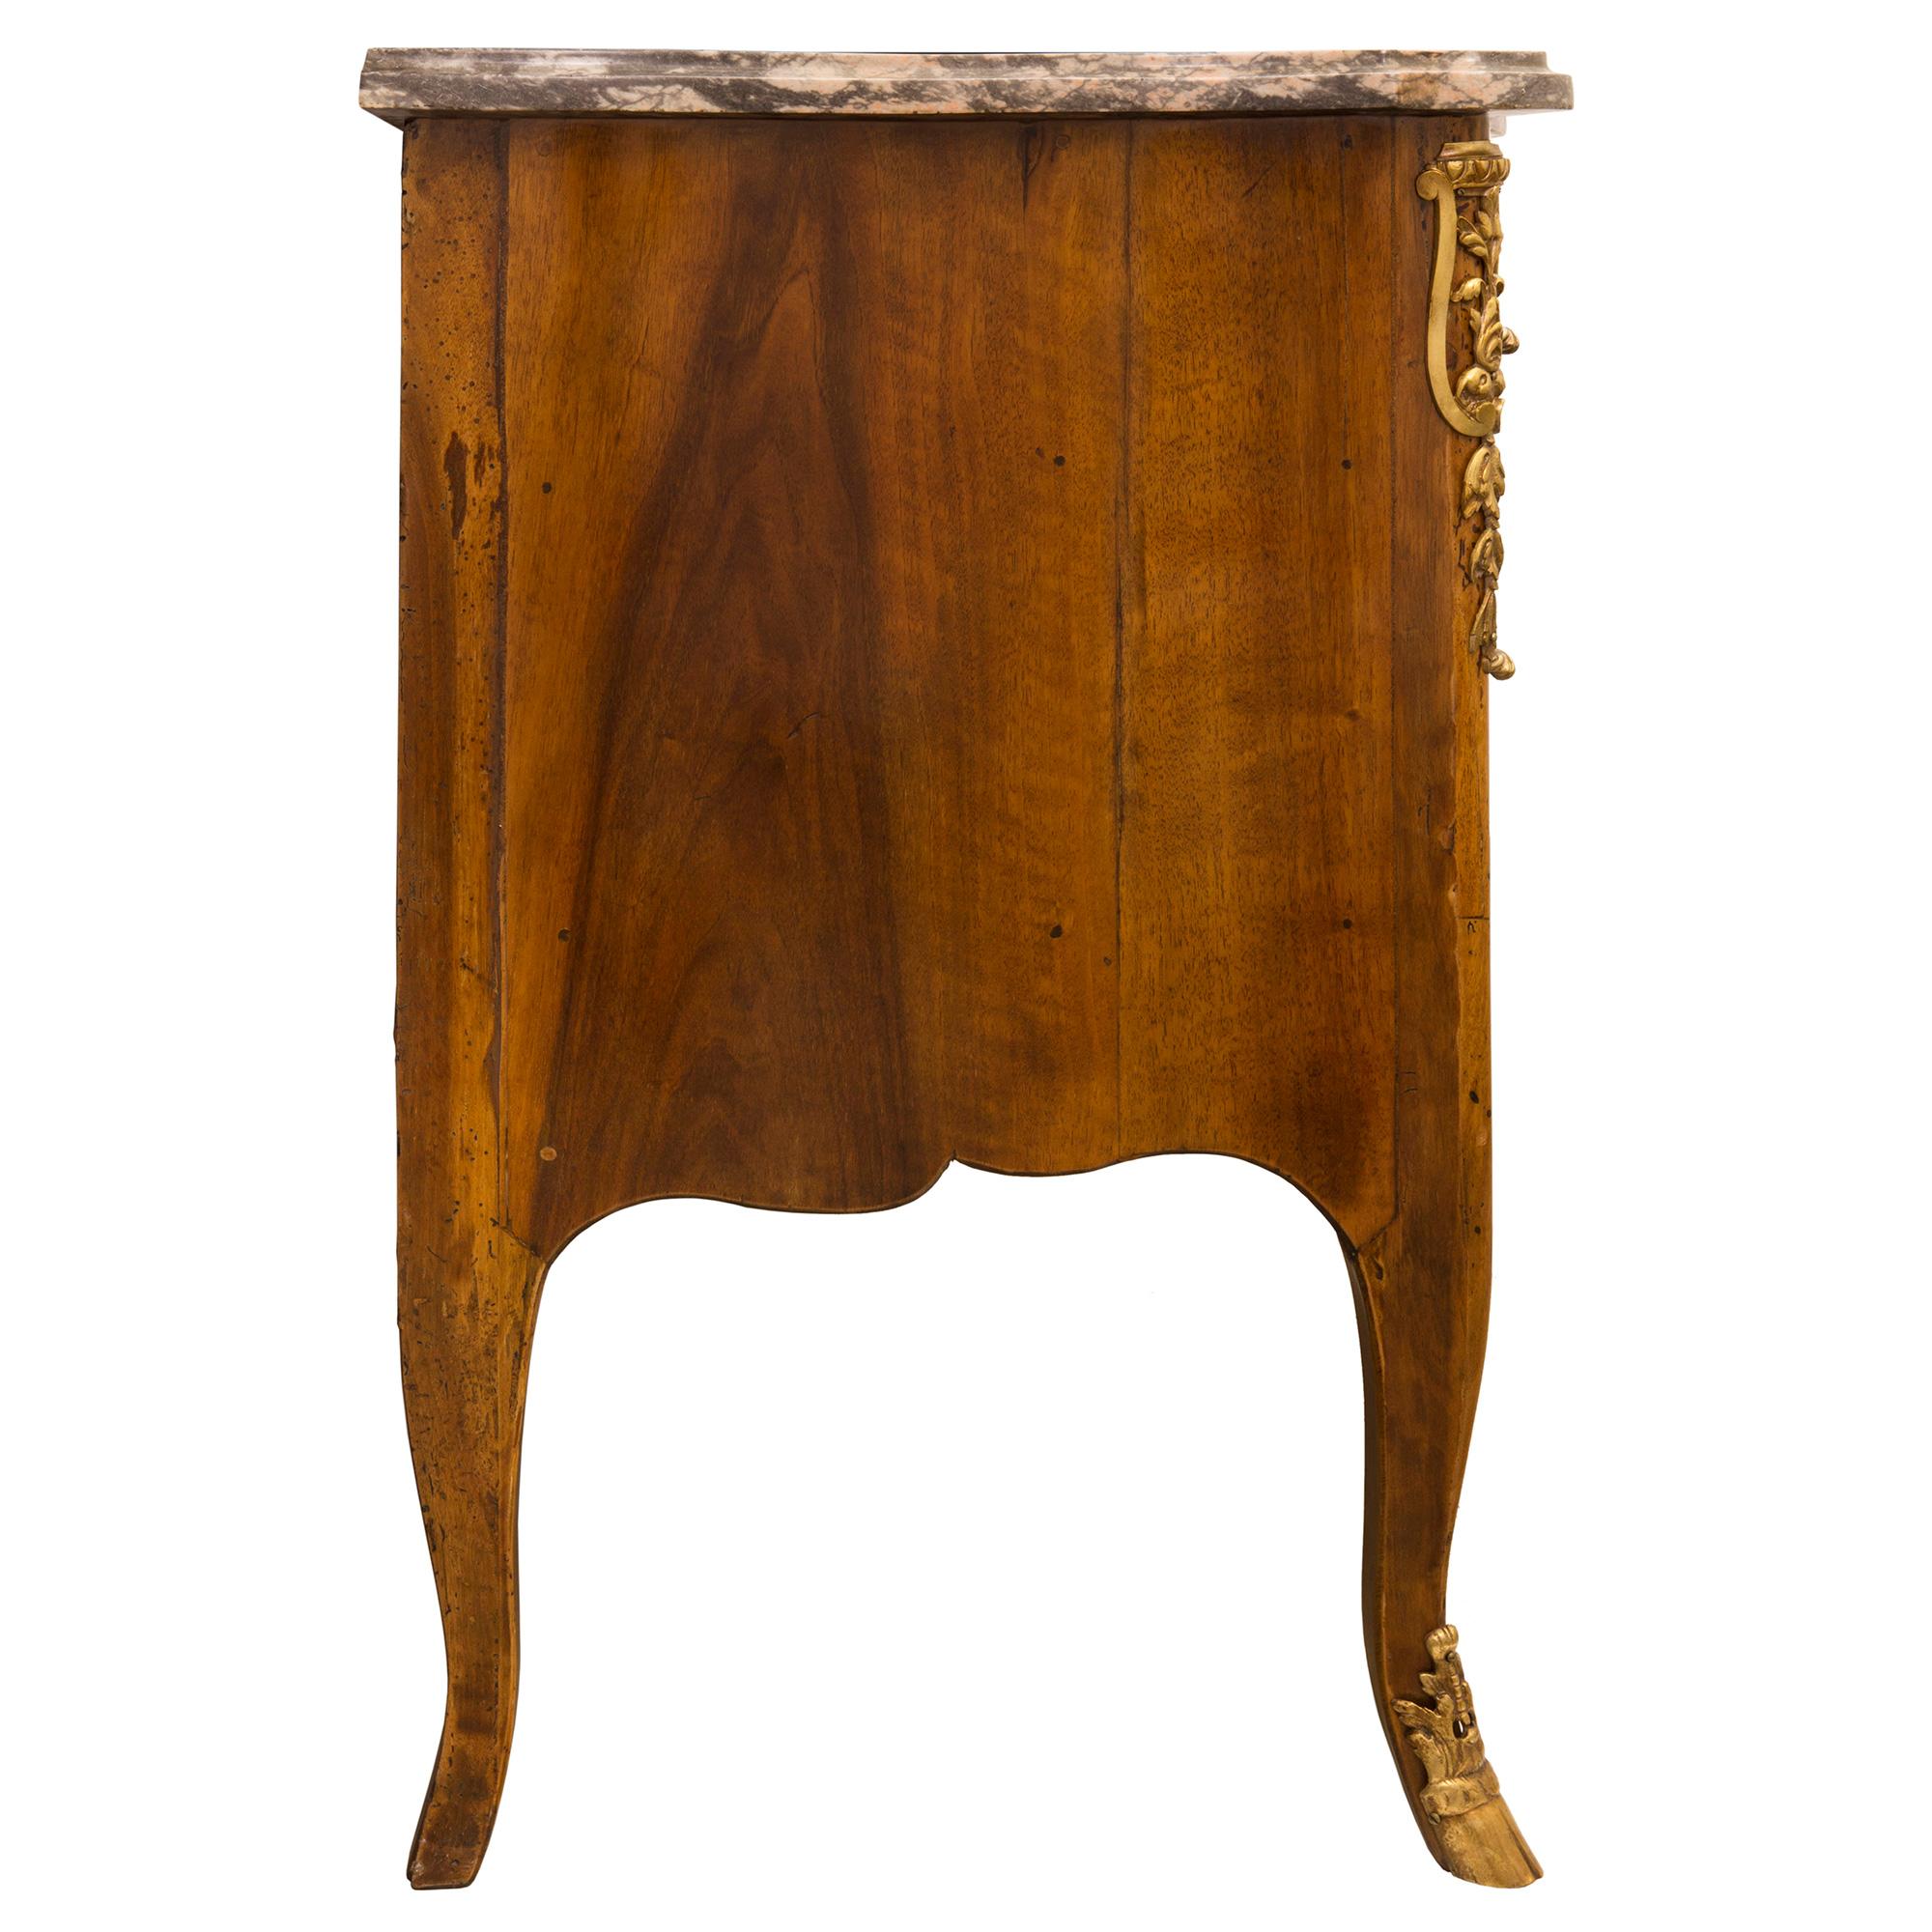 18th Century and Earlier French 18th Century Régence Period Walnut, Fruitwood, Ormolu, and Marble Commode For Sale